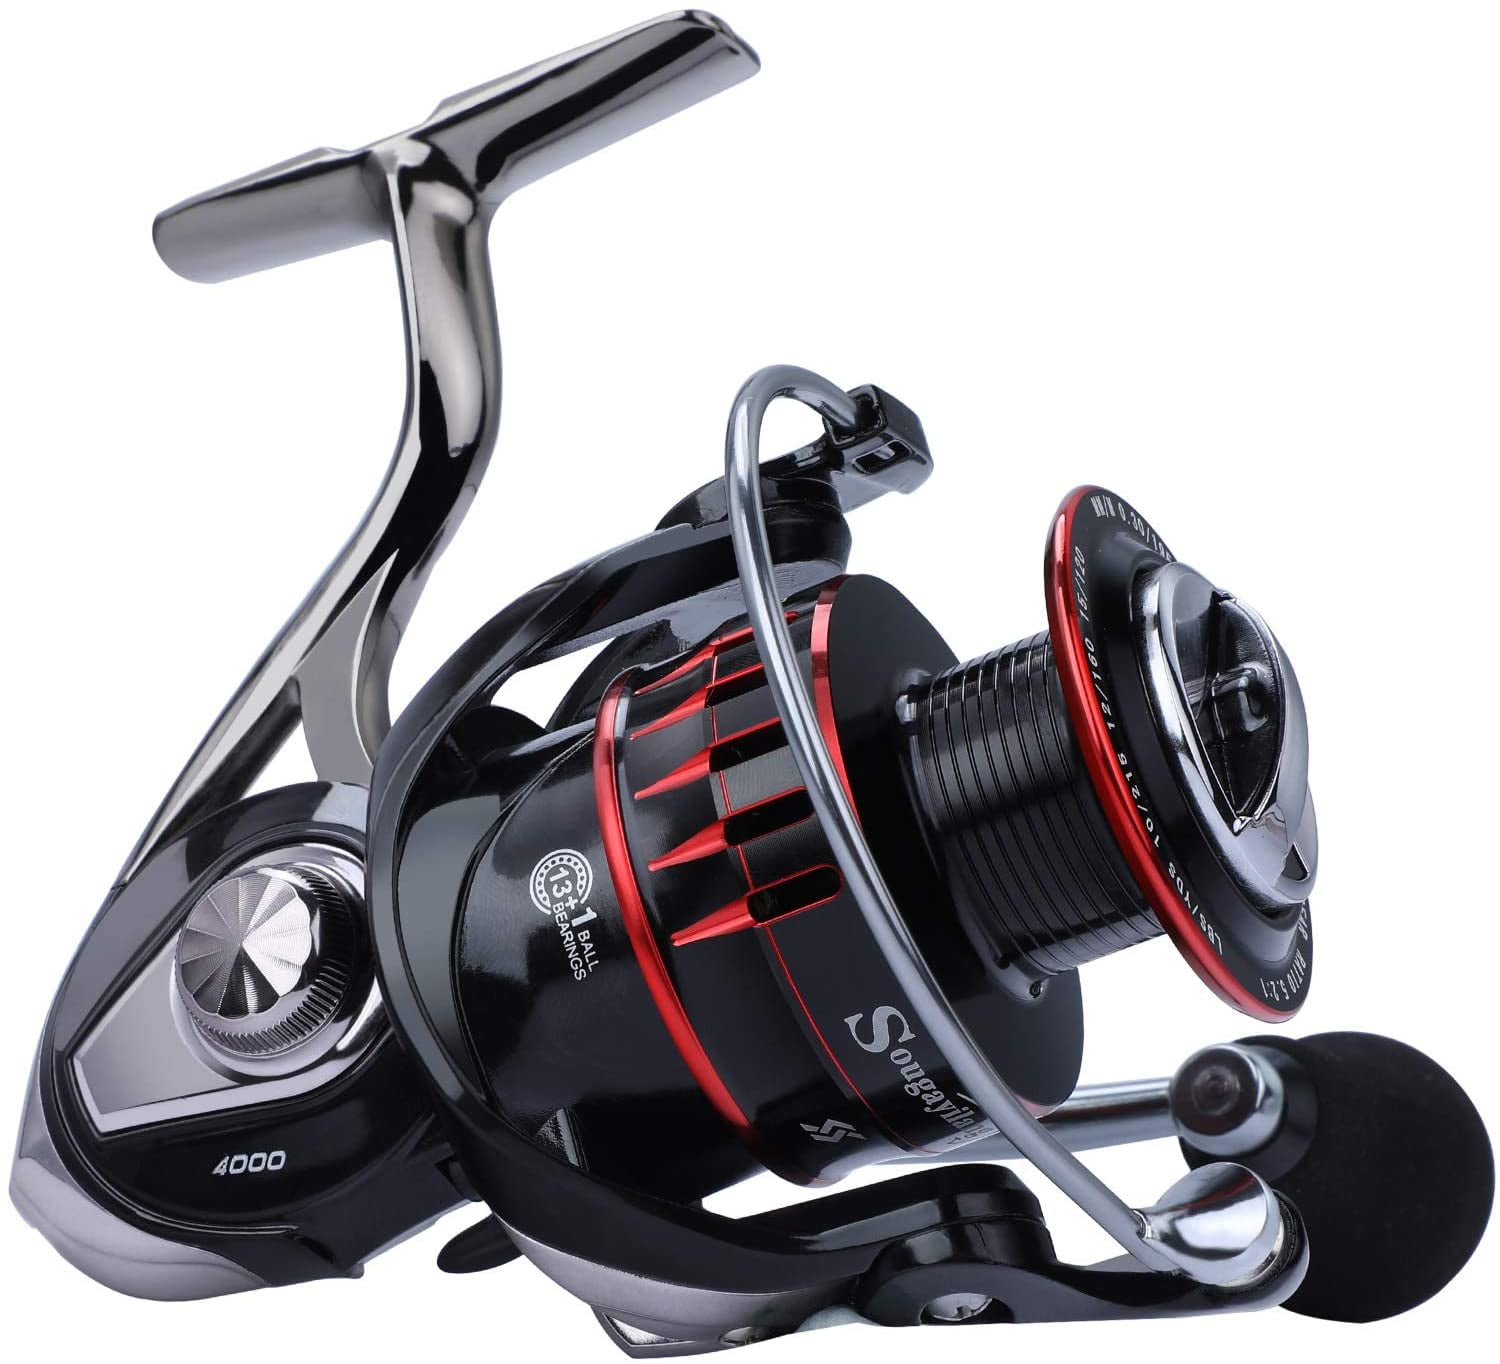 Super Polymer Grips for Freshwater or Saltwater Spinning Reel Sougayilang Spinning Fishing Reel 6.0:1 Gear Ratio Graphite Frame 12+1 BB Colorful Fishing Reels with 25 lbs Carbon Drag